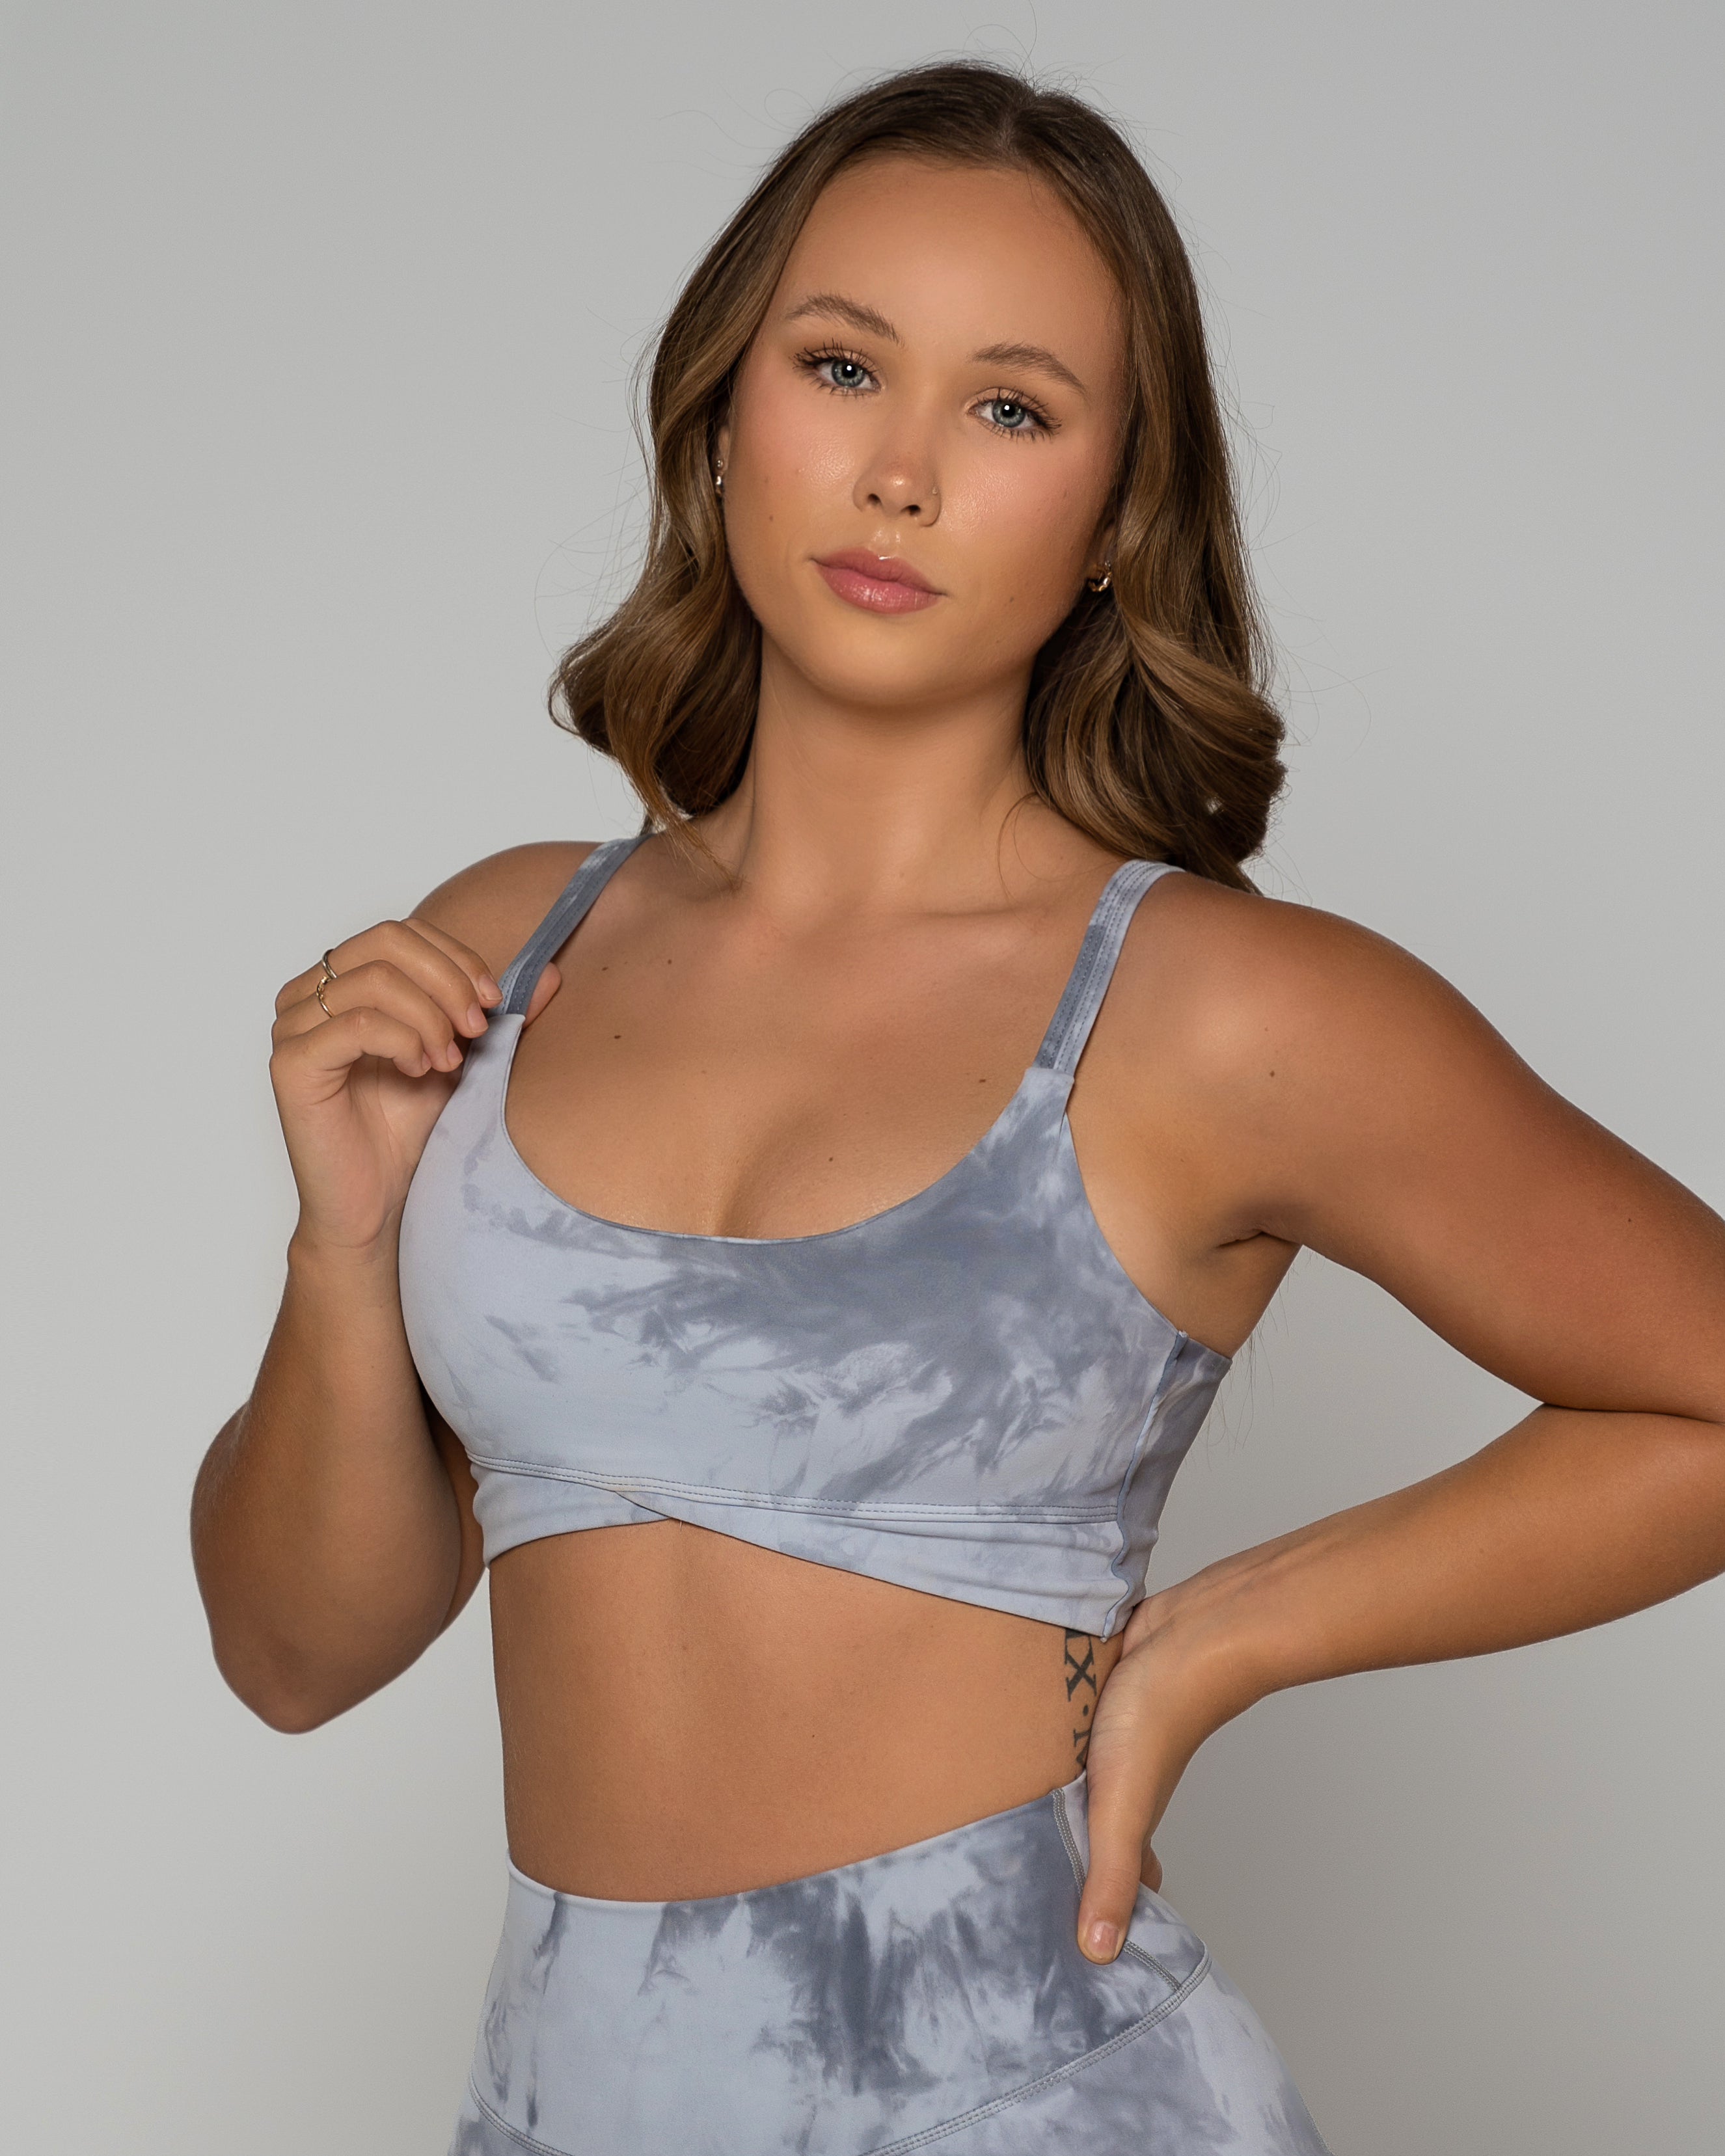 zarc - Sports bra features: made from poly compression so super